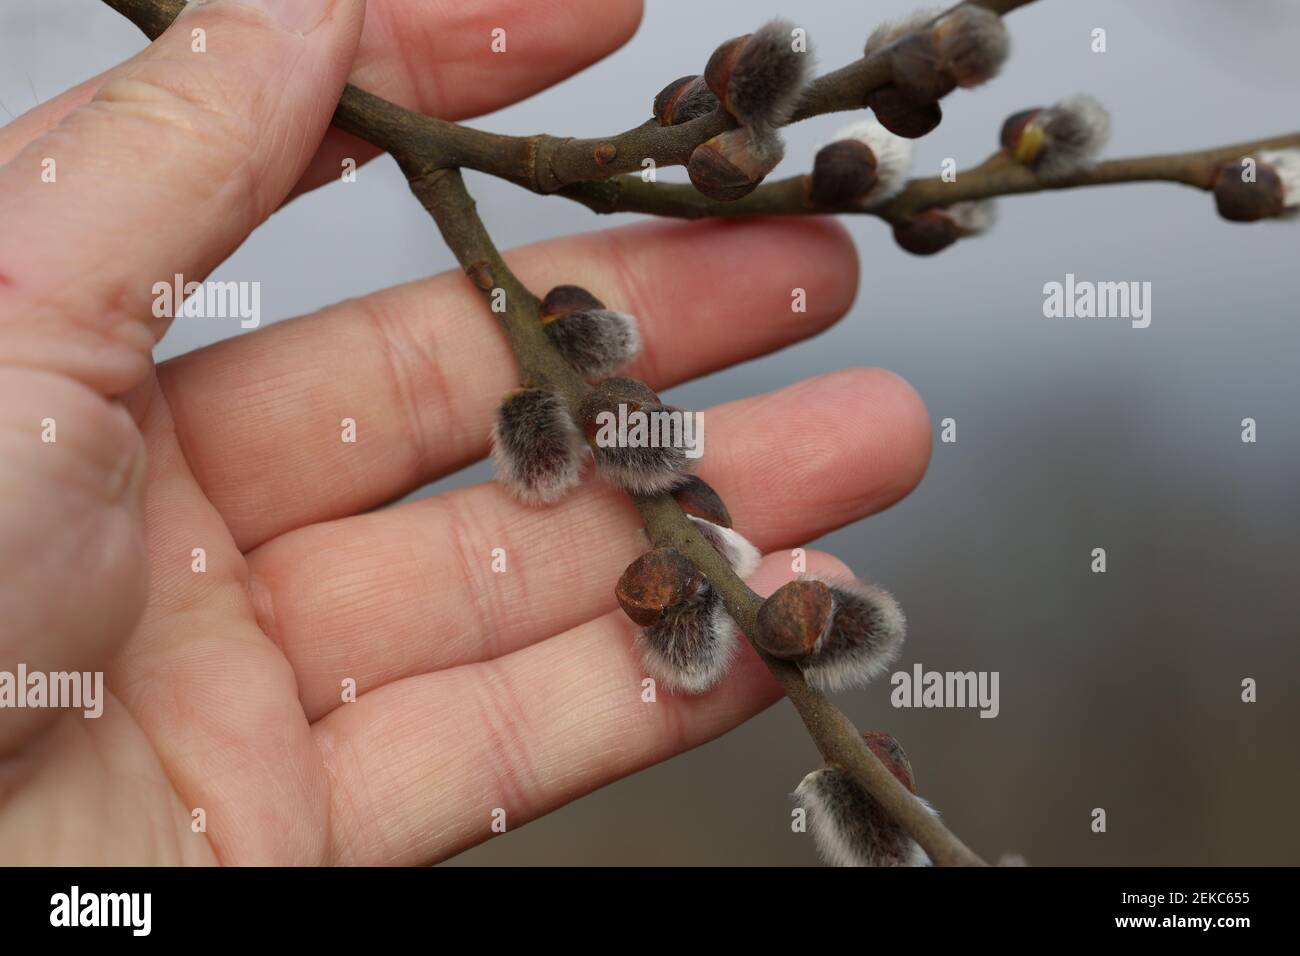 Spring. A hand holding a willow branch. Stock Photo